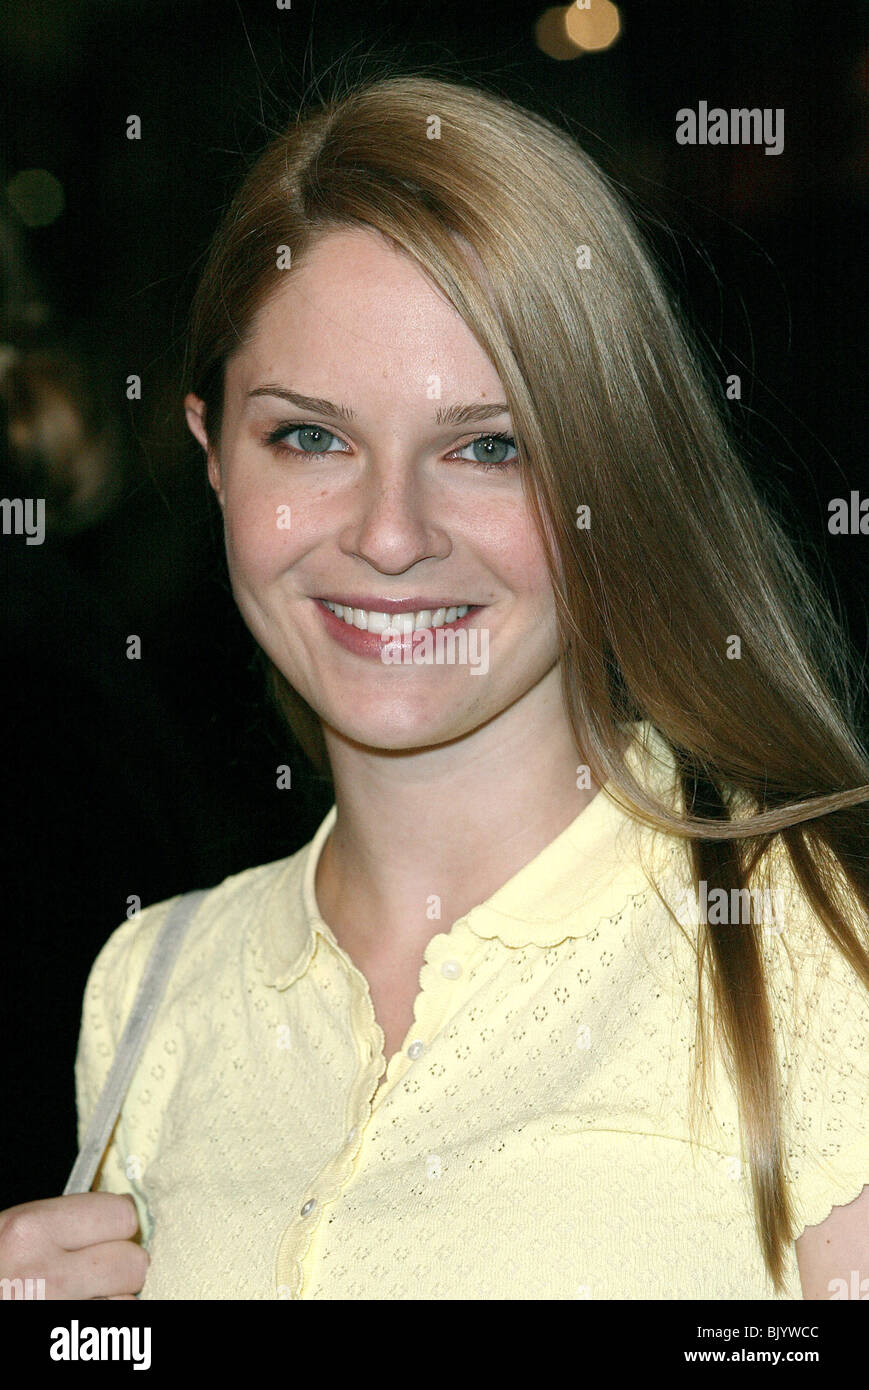 SHANNON LUCIO DEADWOOD SEASON 2 PREMIERE CHINESE THEATRE HOLLYWOOD LOS ANGELES USA 03 March 2005 Stock Photo